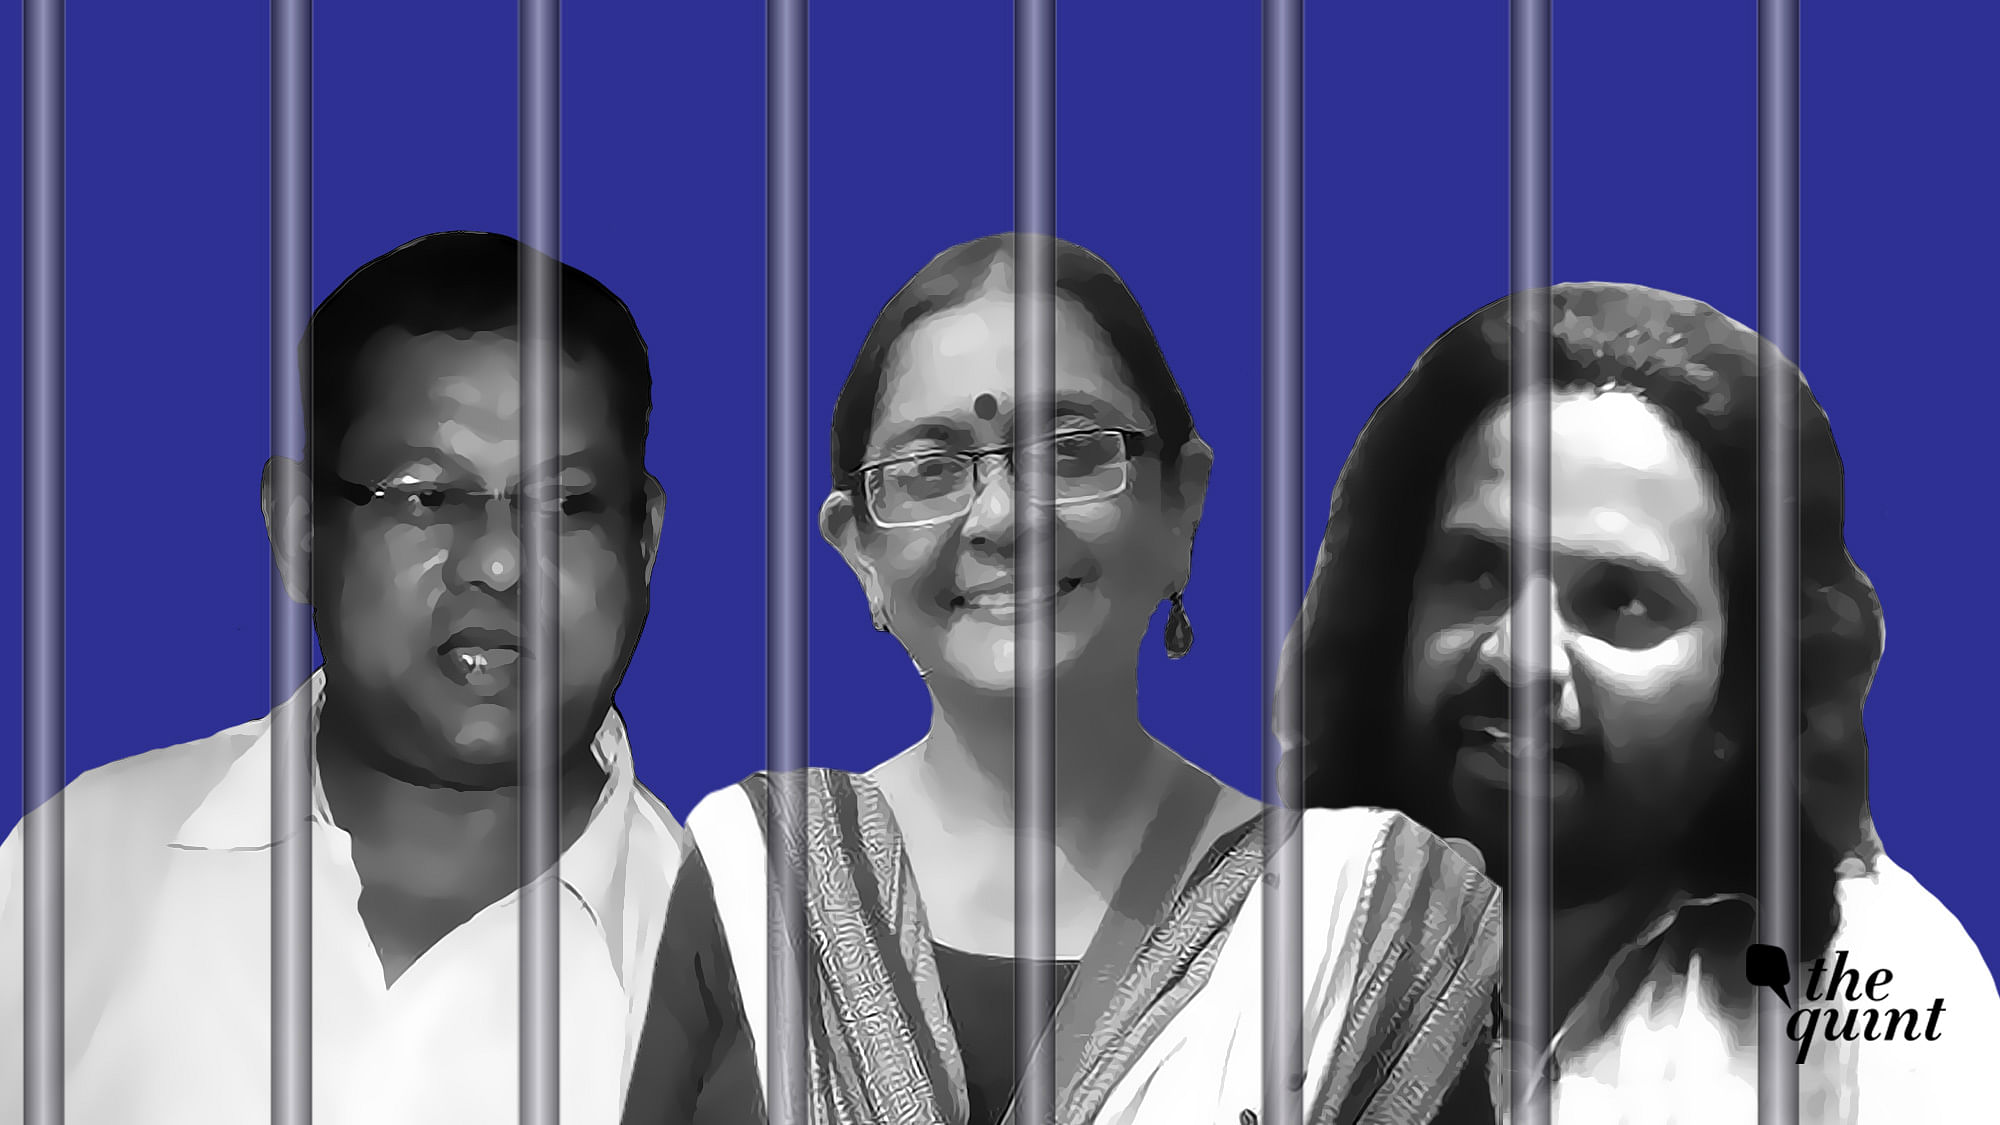 Surendra Gadling, Shoma Sen and Rona Wilson, activists arrested and detained under the UAPA.